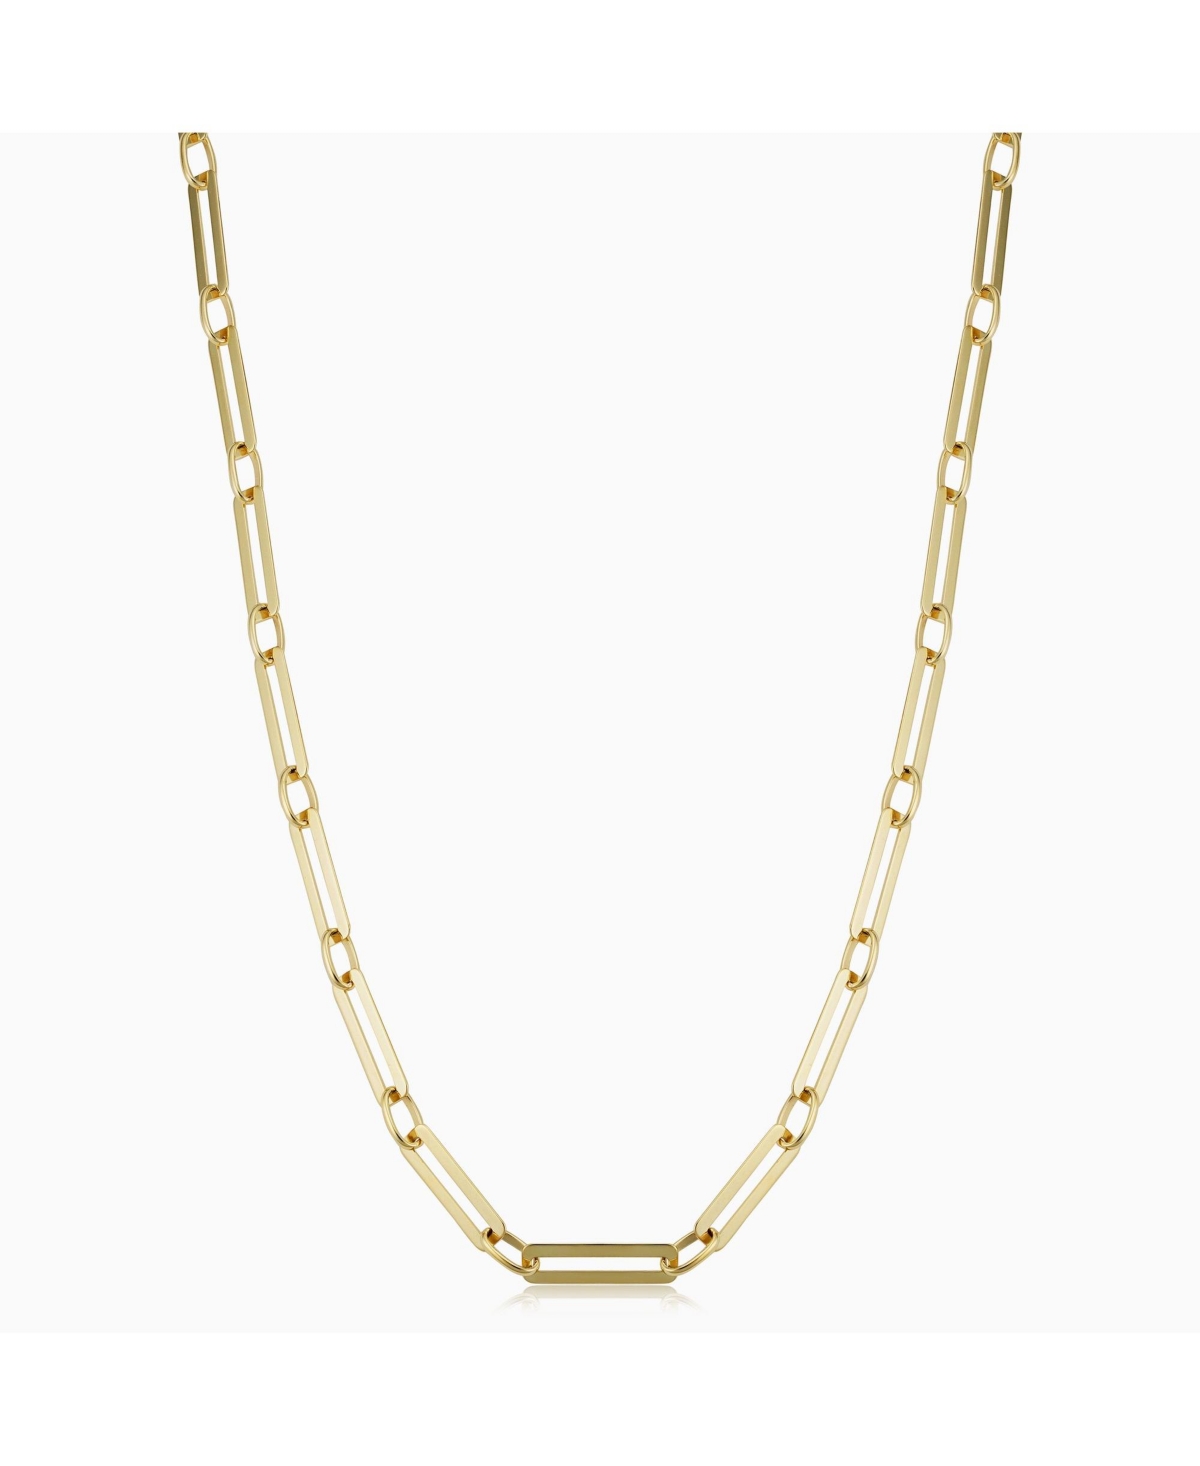 ORADINA VENICE ALTERNATING LINK NECKLACE 20" IN 14K YELLOW GOLD